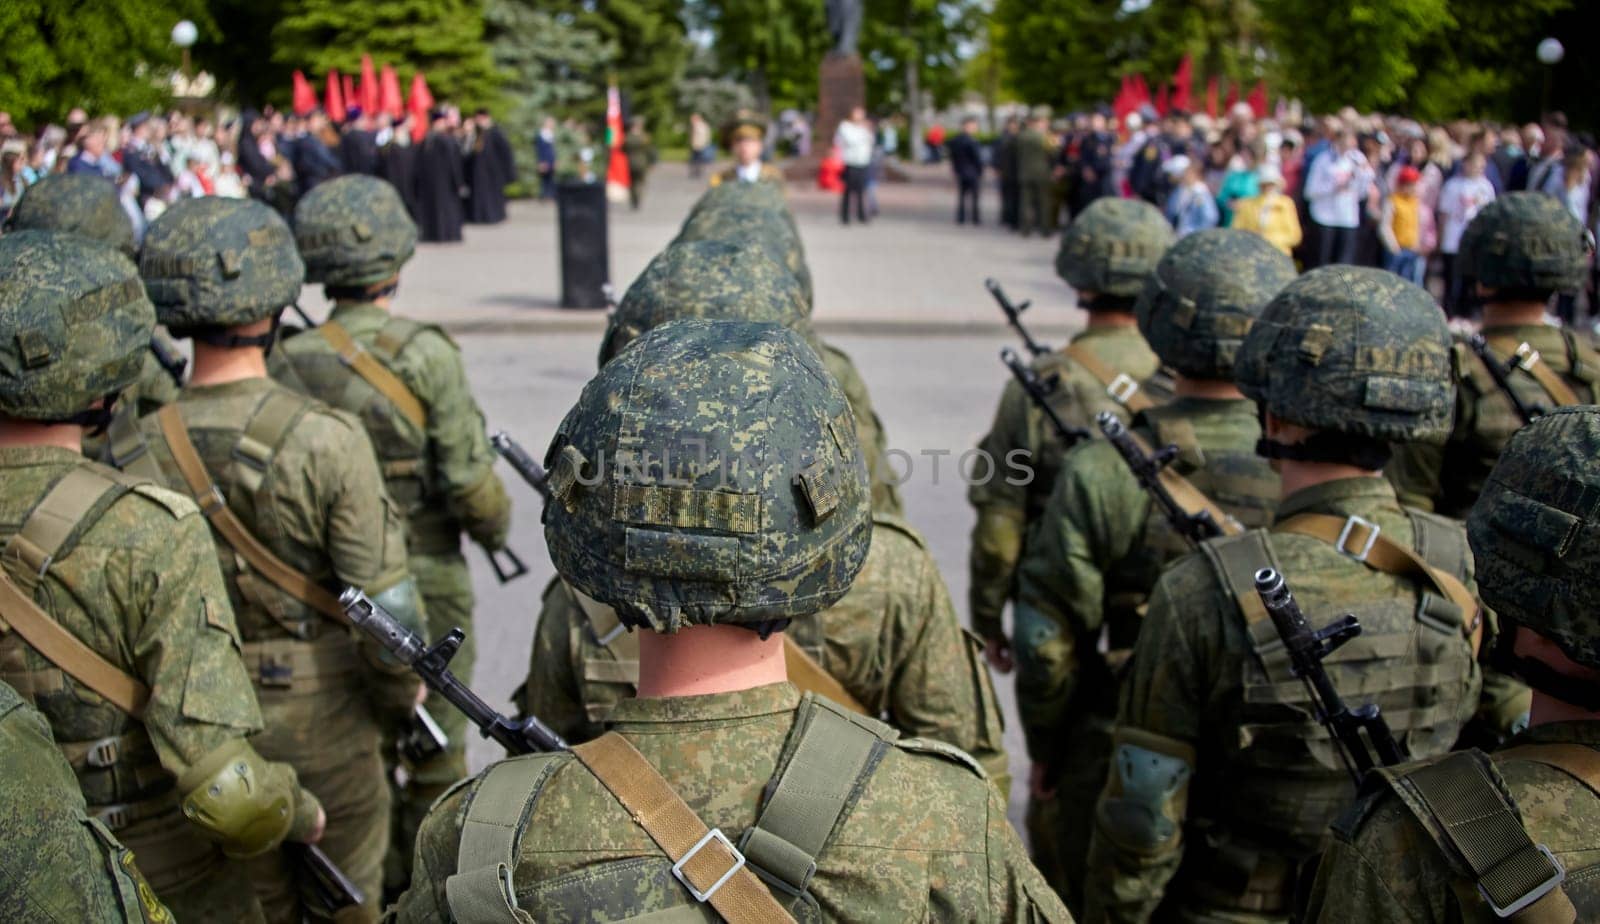 Soldiers in camo uniforms and helmets, armed with rifles, march in a parade displaying military might and discipline. This image captures the essence of military power and patriotism.